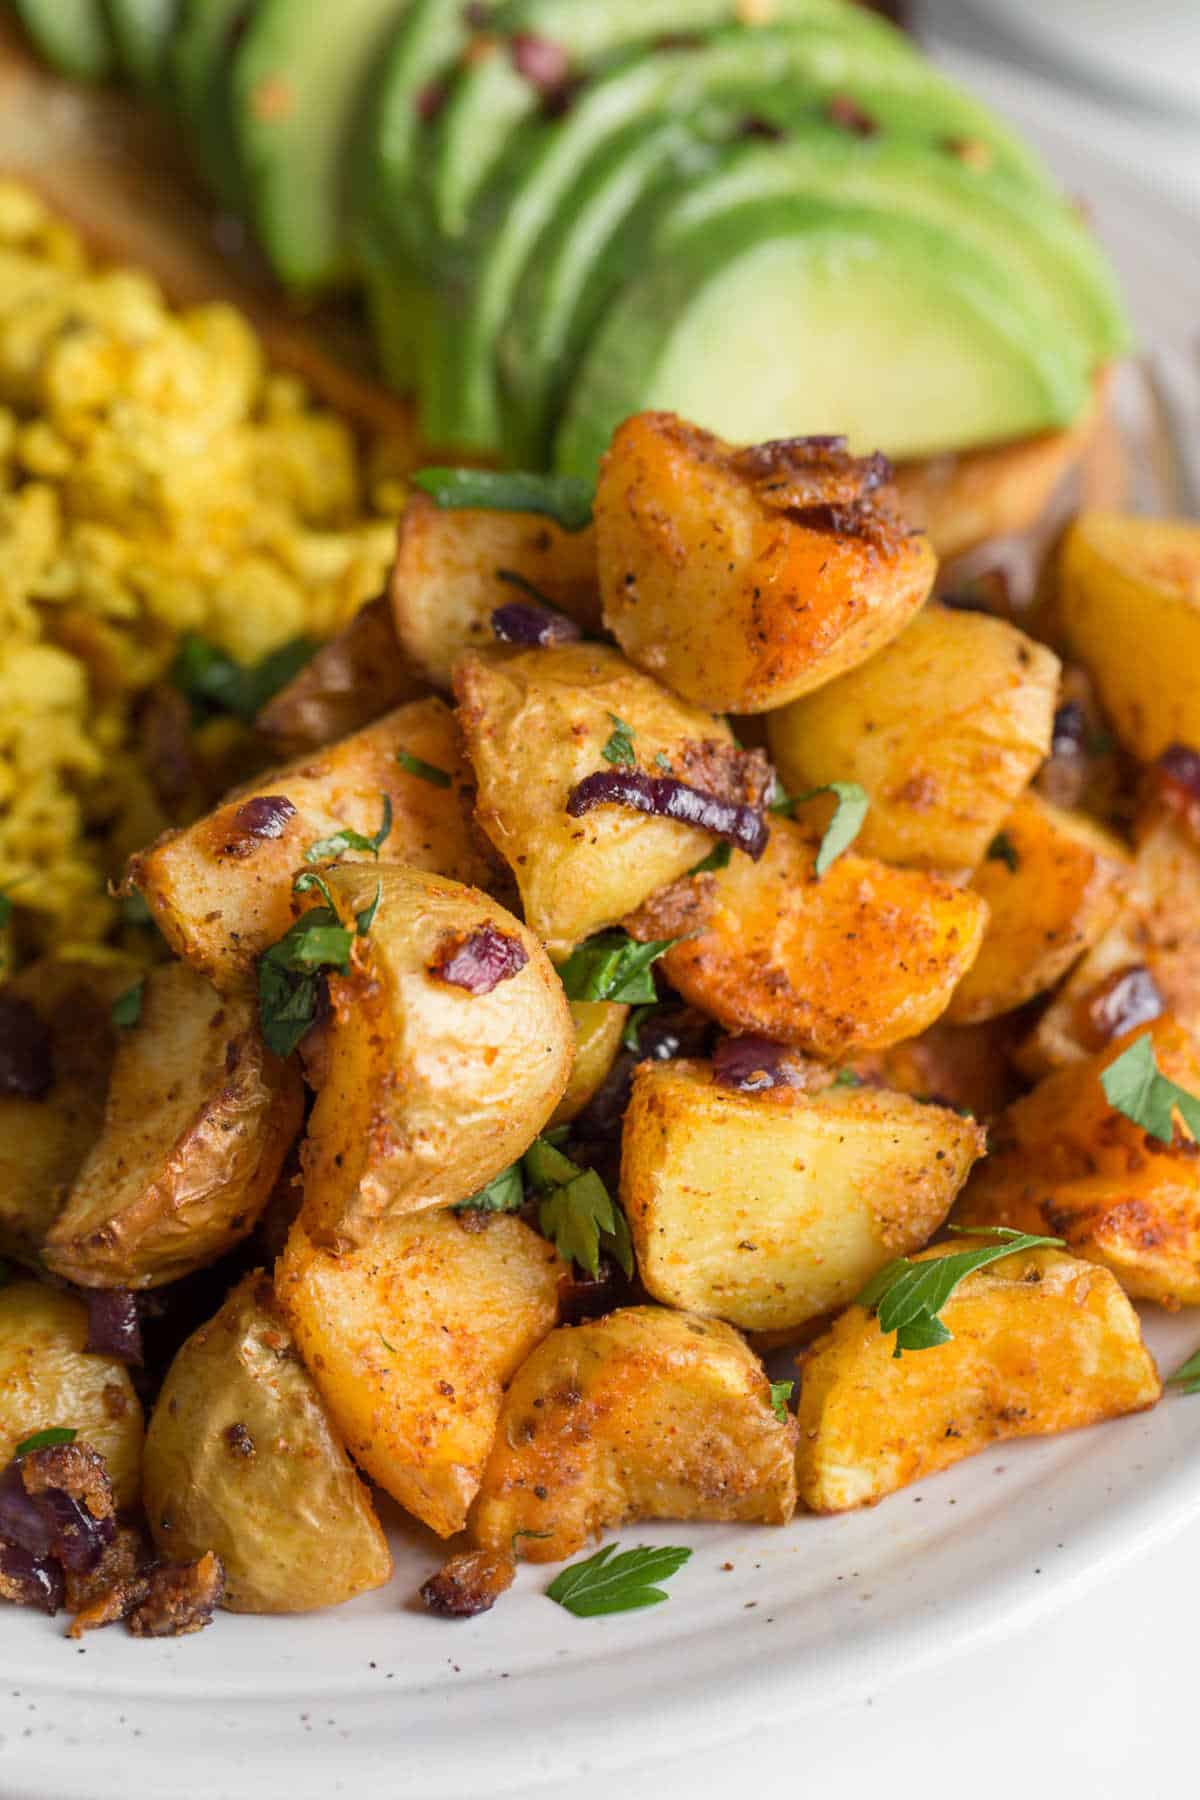 Air fryer home fries on a plate.